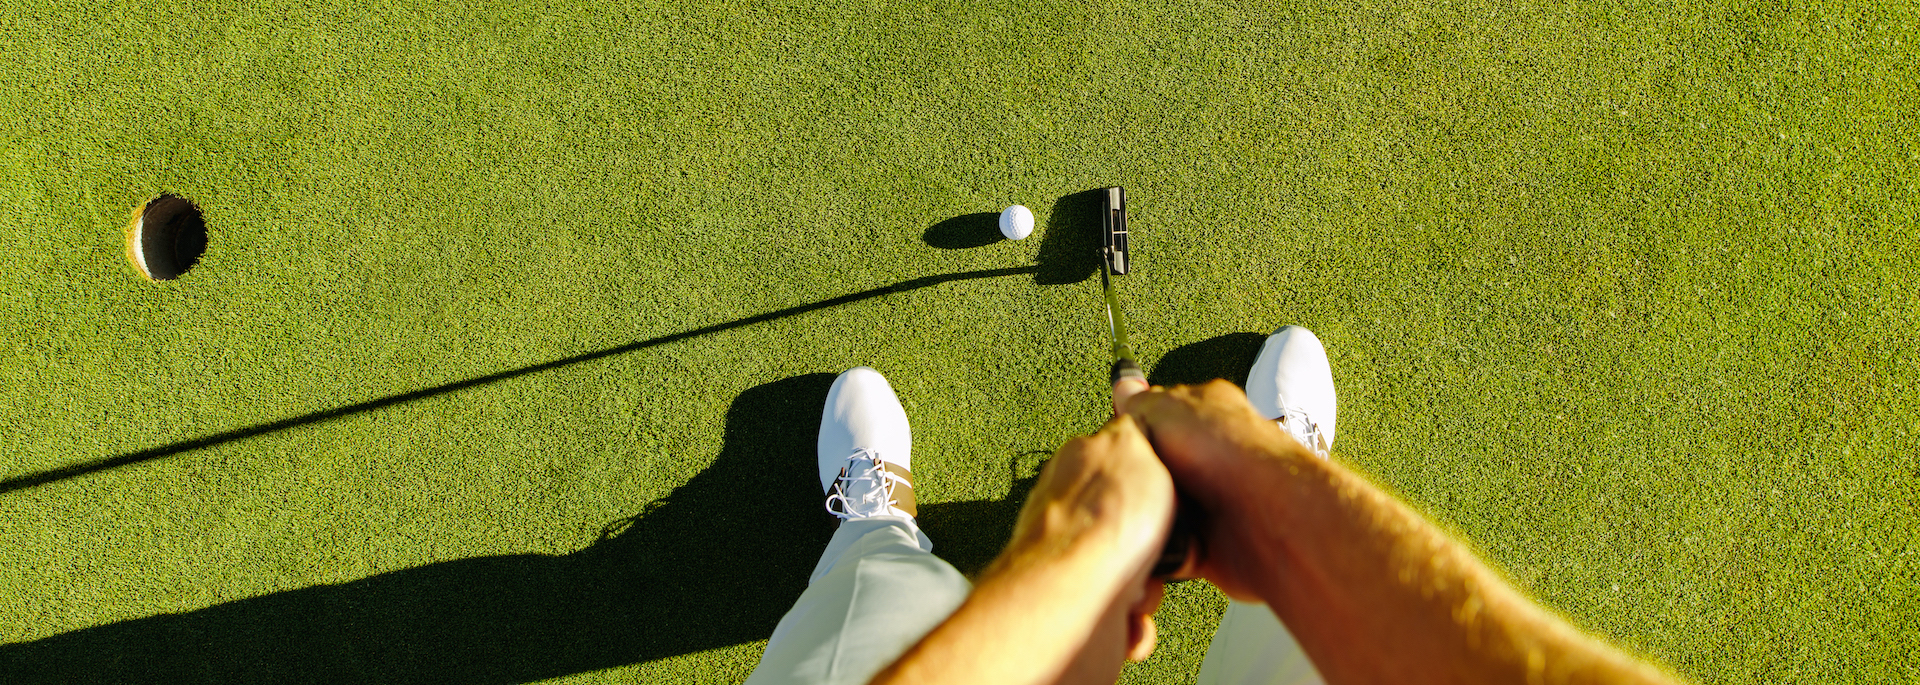 person with two hands on golf club lining up to hit a white golf ball